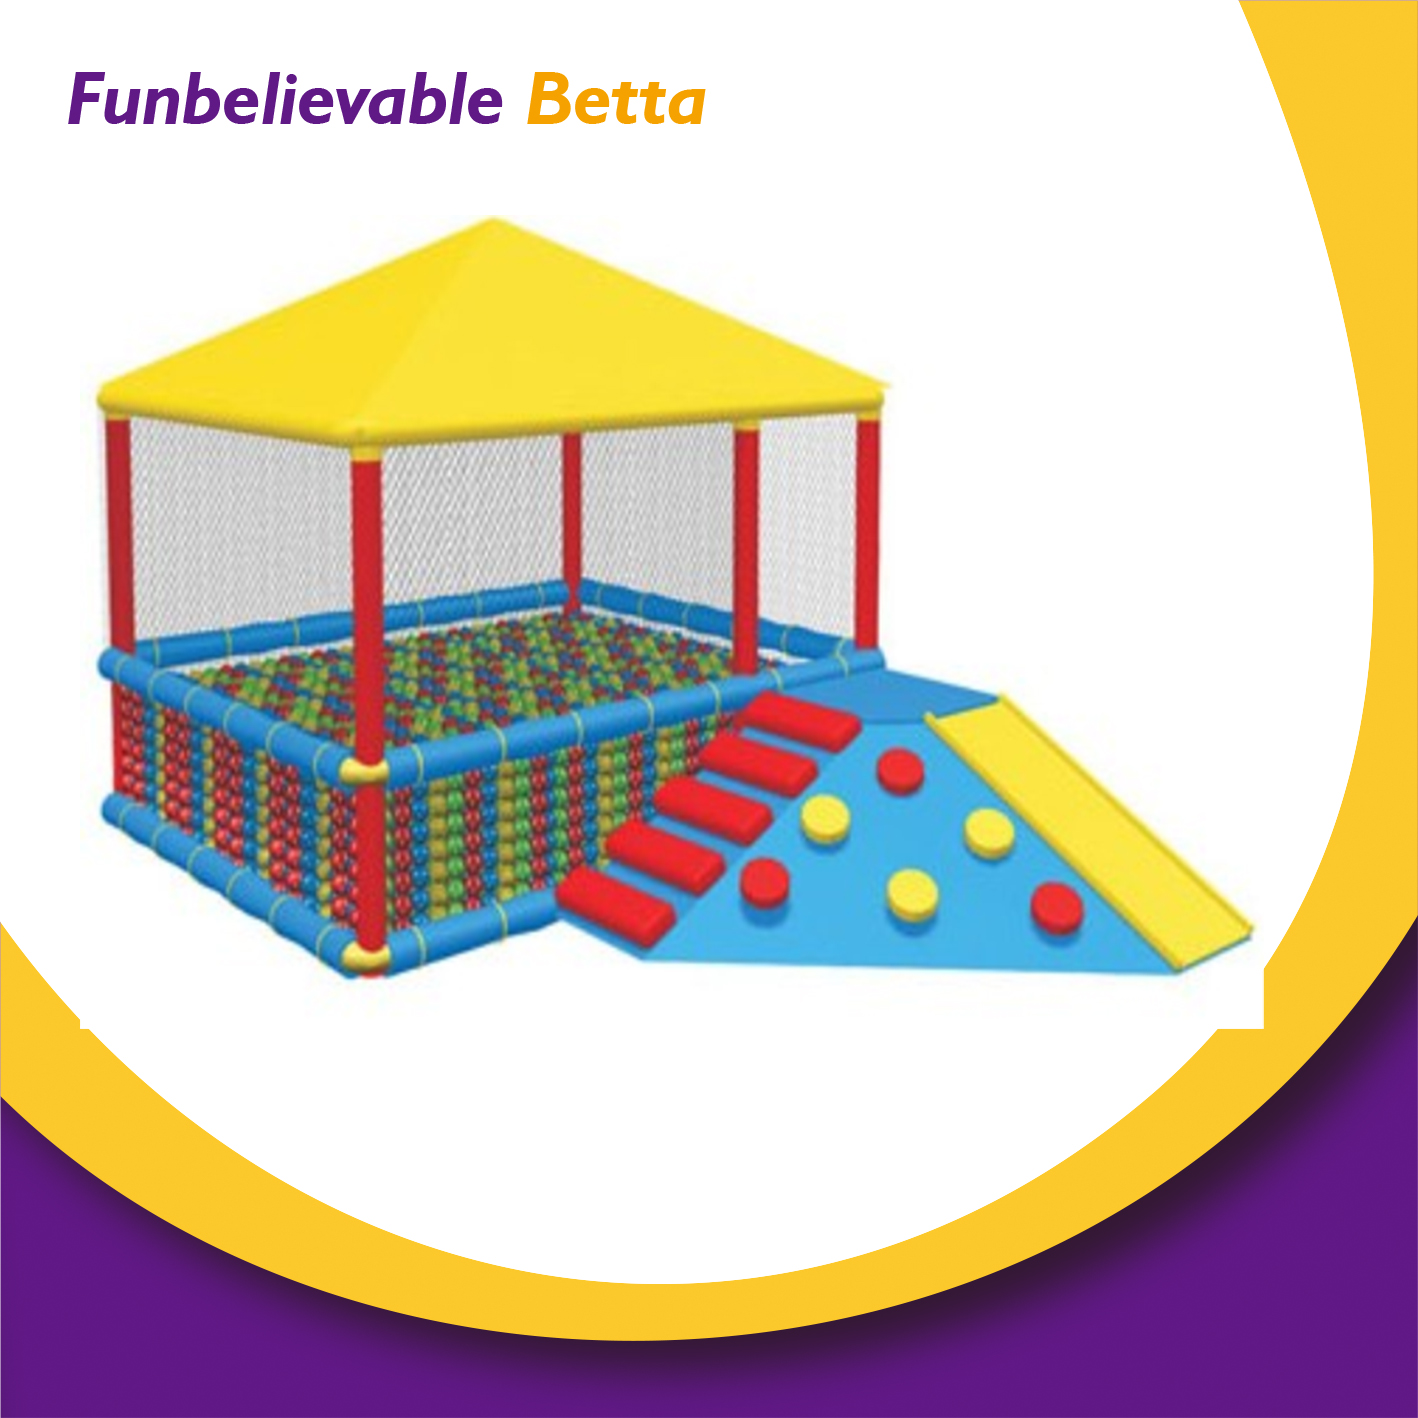 Bettaplay Customized size and color kids zone indoor soft play area indoor playground equipment